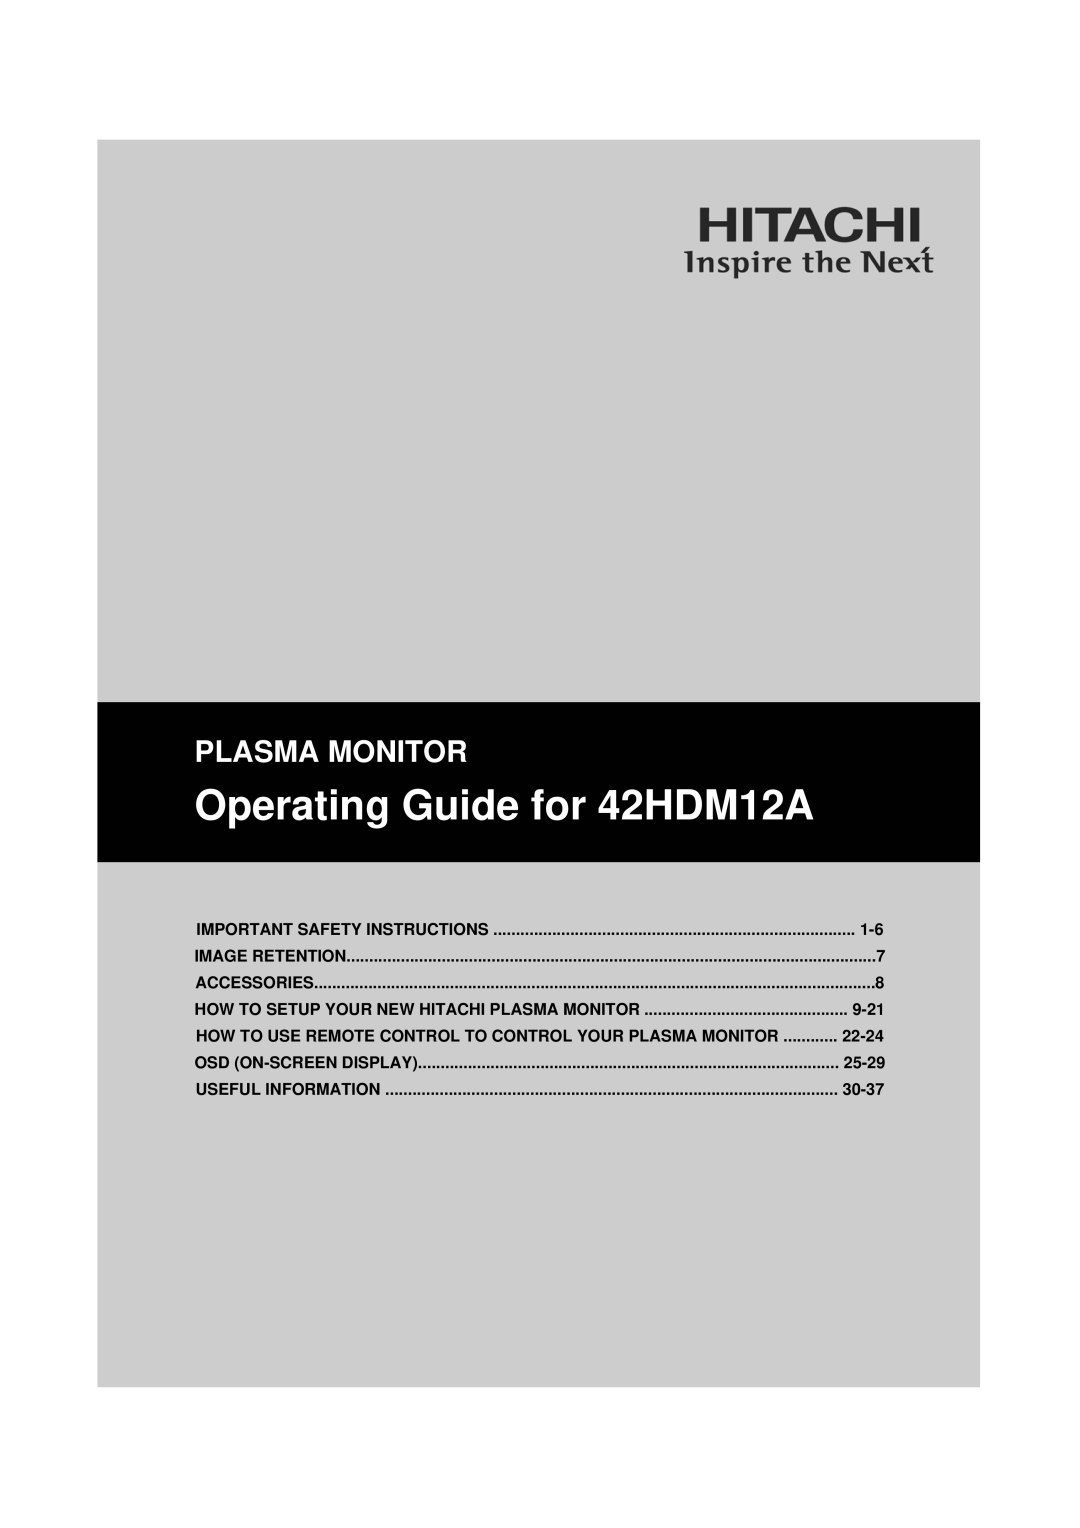 Hitachi important safety instructions Operating Guide for 42HDM12A, Plasma Monitor, 9-21, 22-24, Osd On-Screen Display 